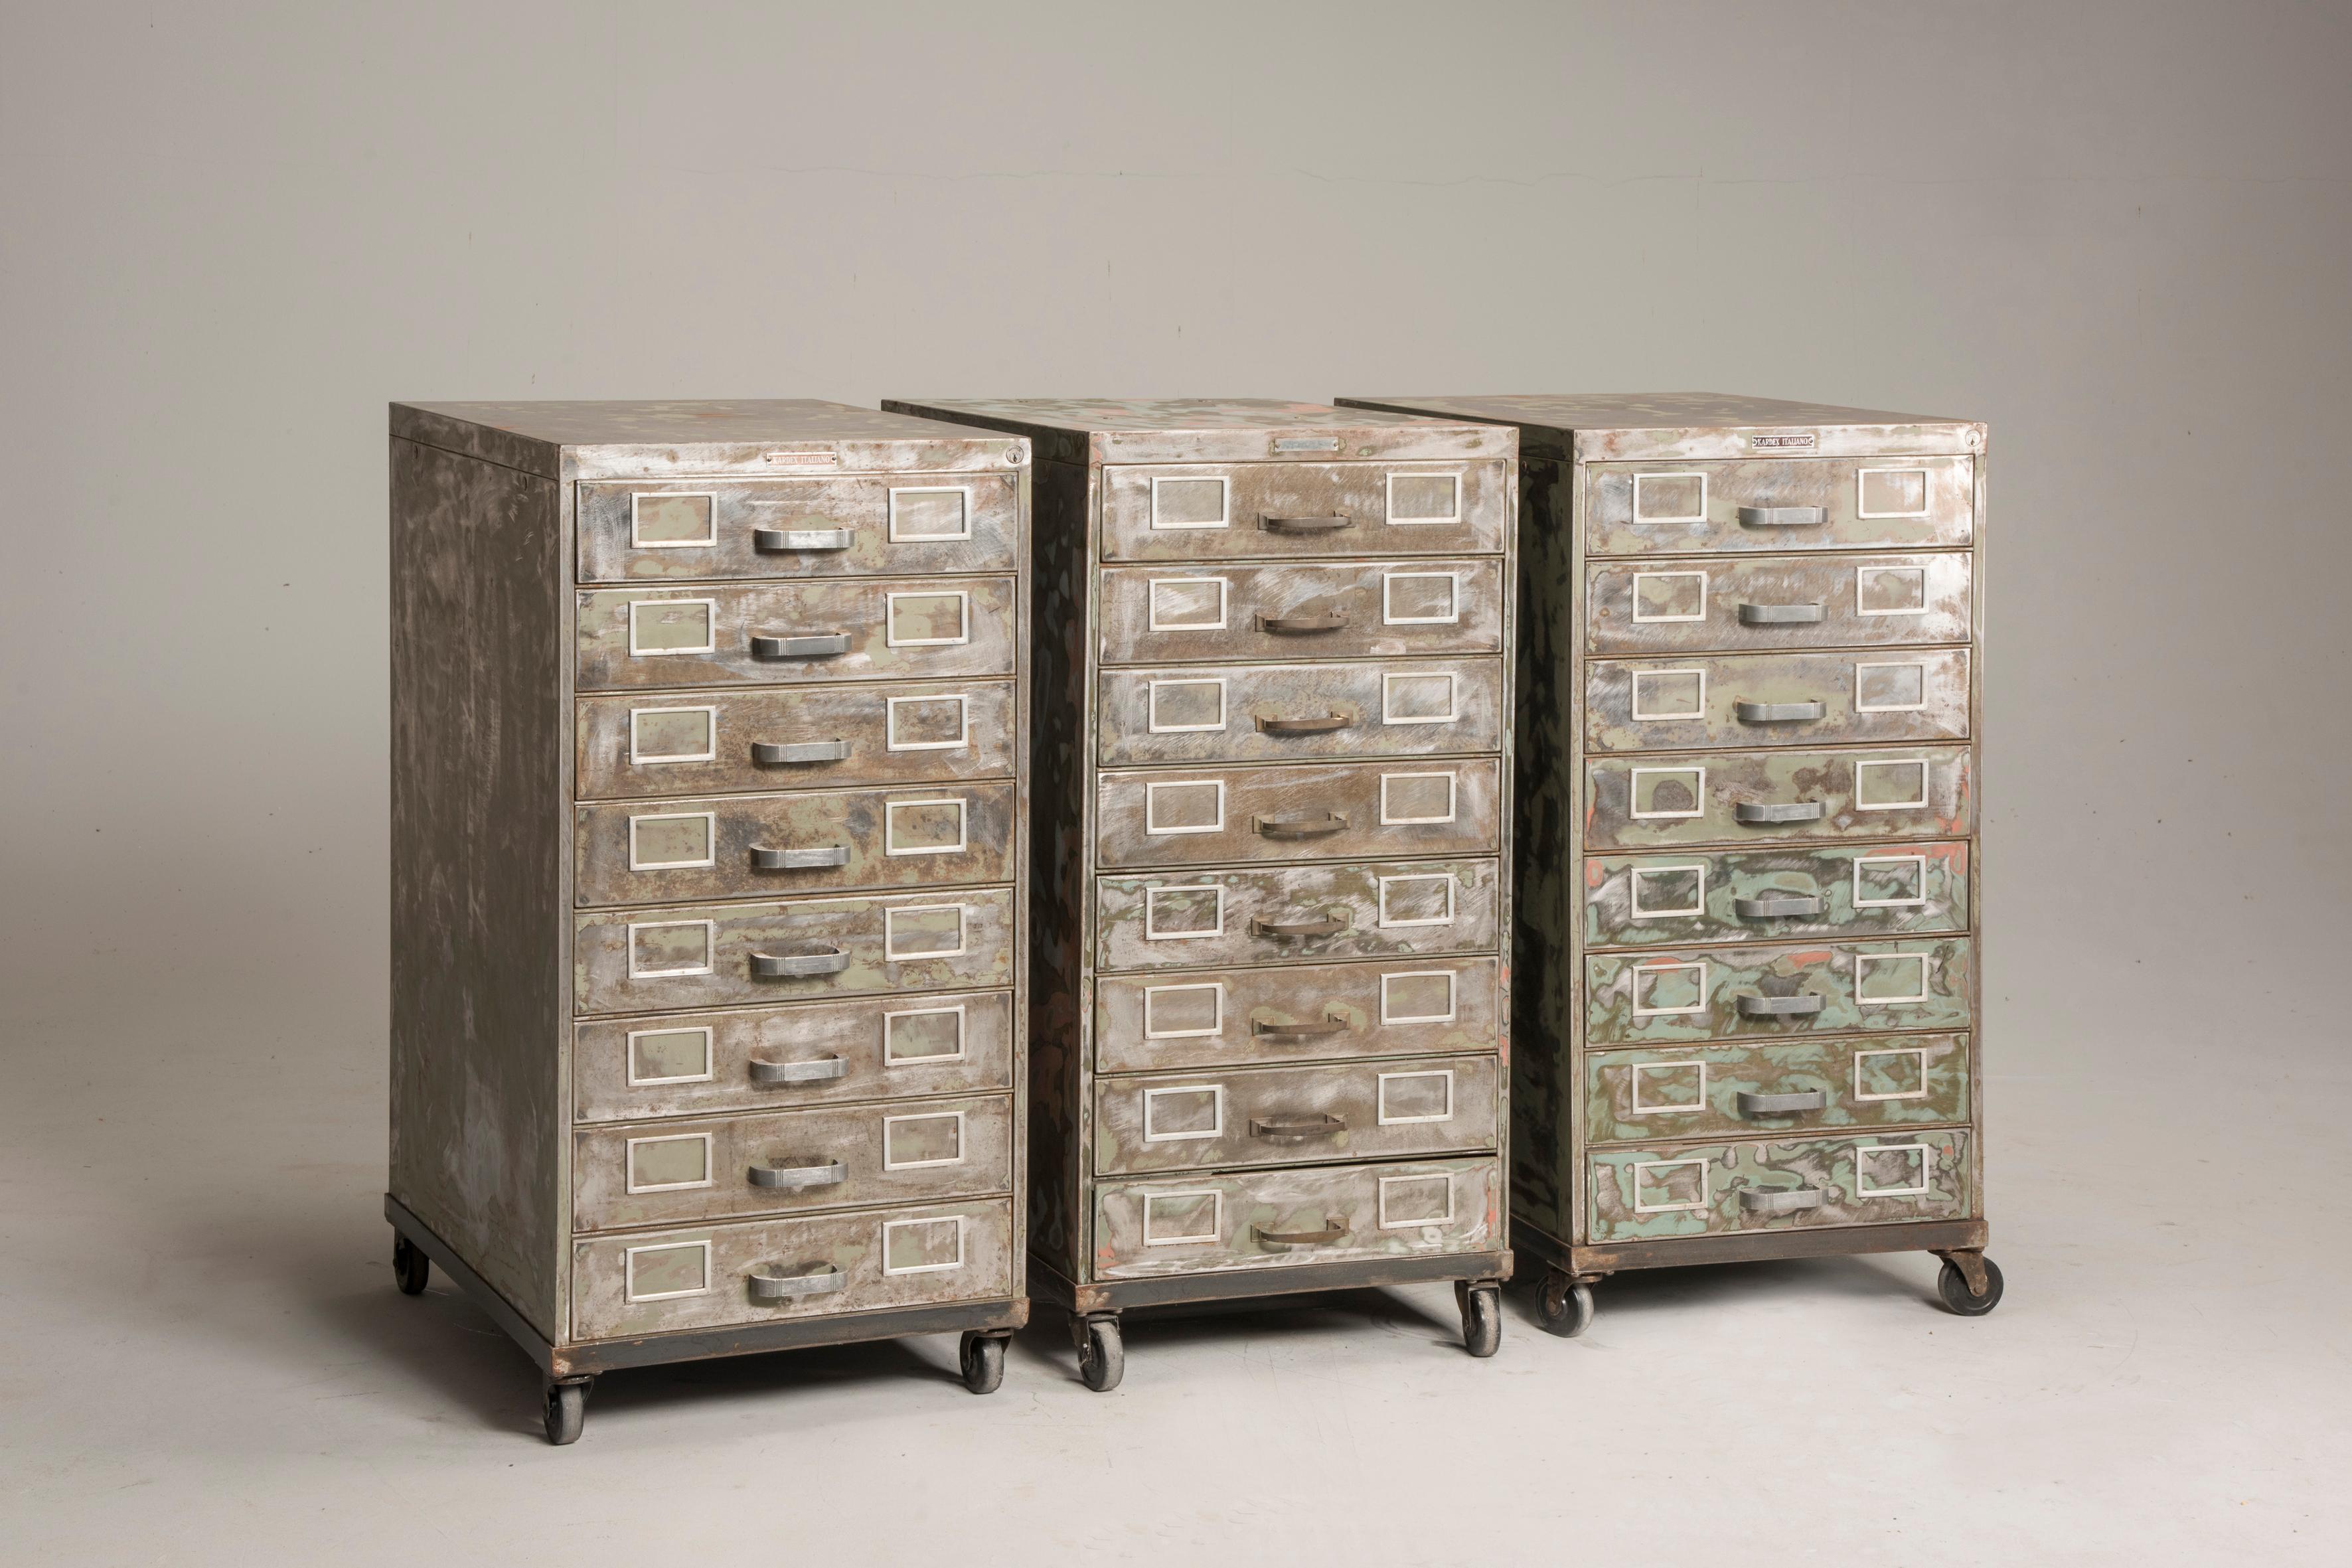 Industrial brushed steel distressed look wheeled filing cabinets.
We propose three filing cabinets with drawers made of brushed steel, they show previous lacquer distressed layer. Each cabinet has eight drawers and each one of them has space for